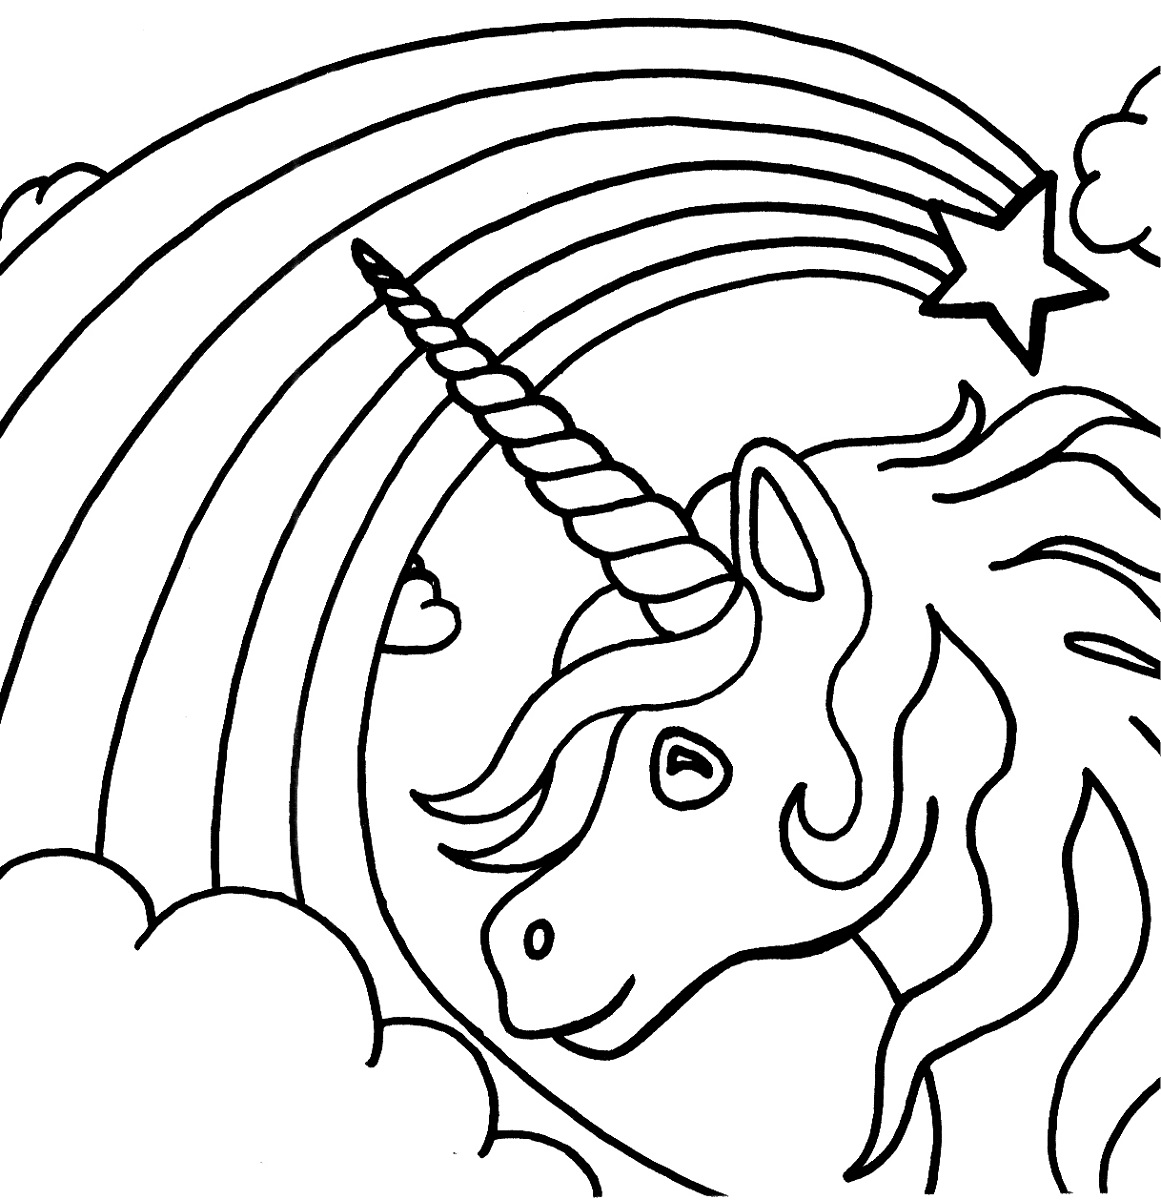 Hard Unicorn Coloring Pages at GetColorings.com   Free ...